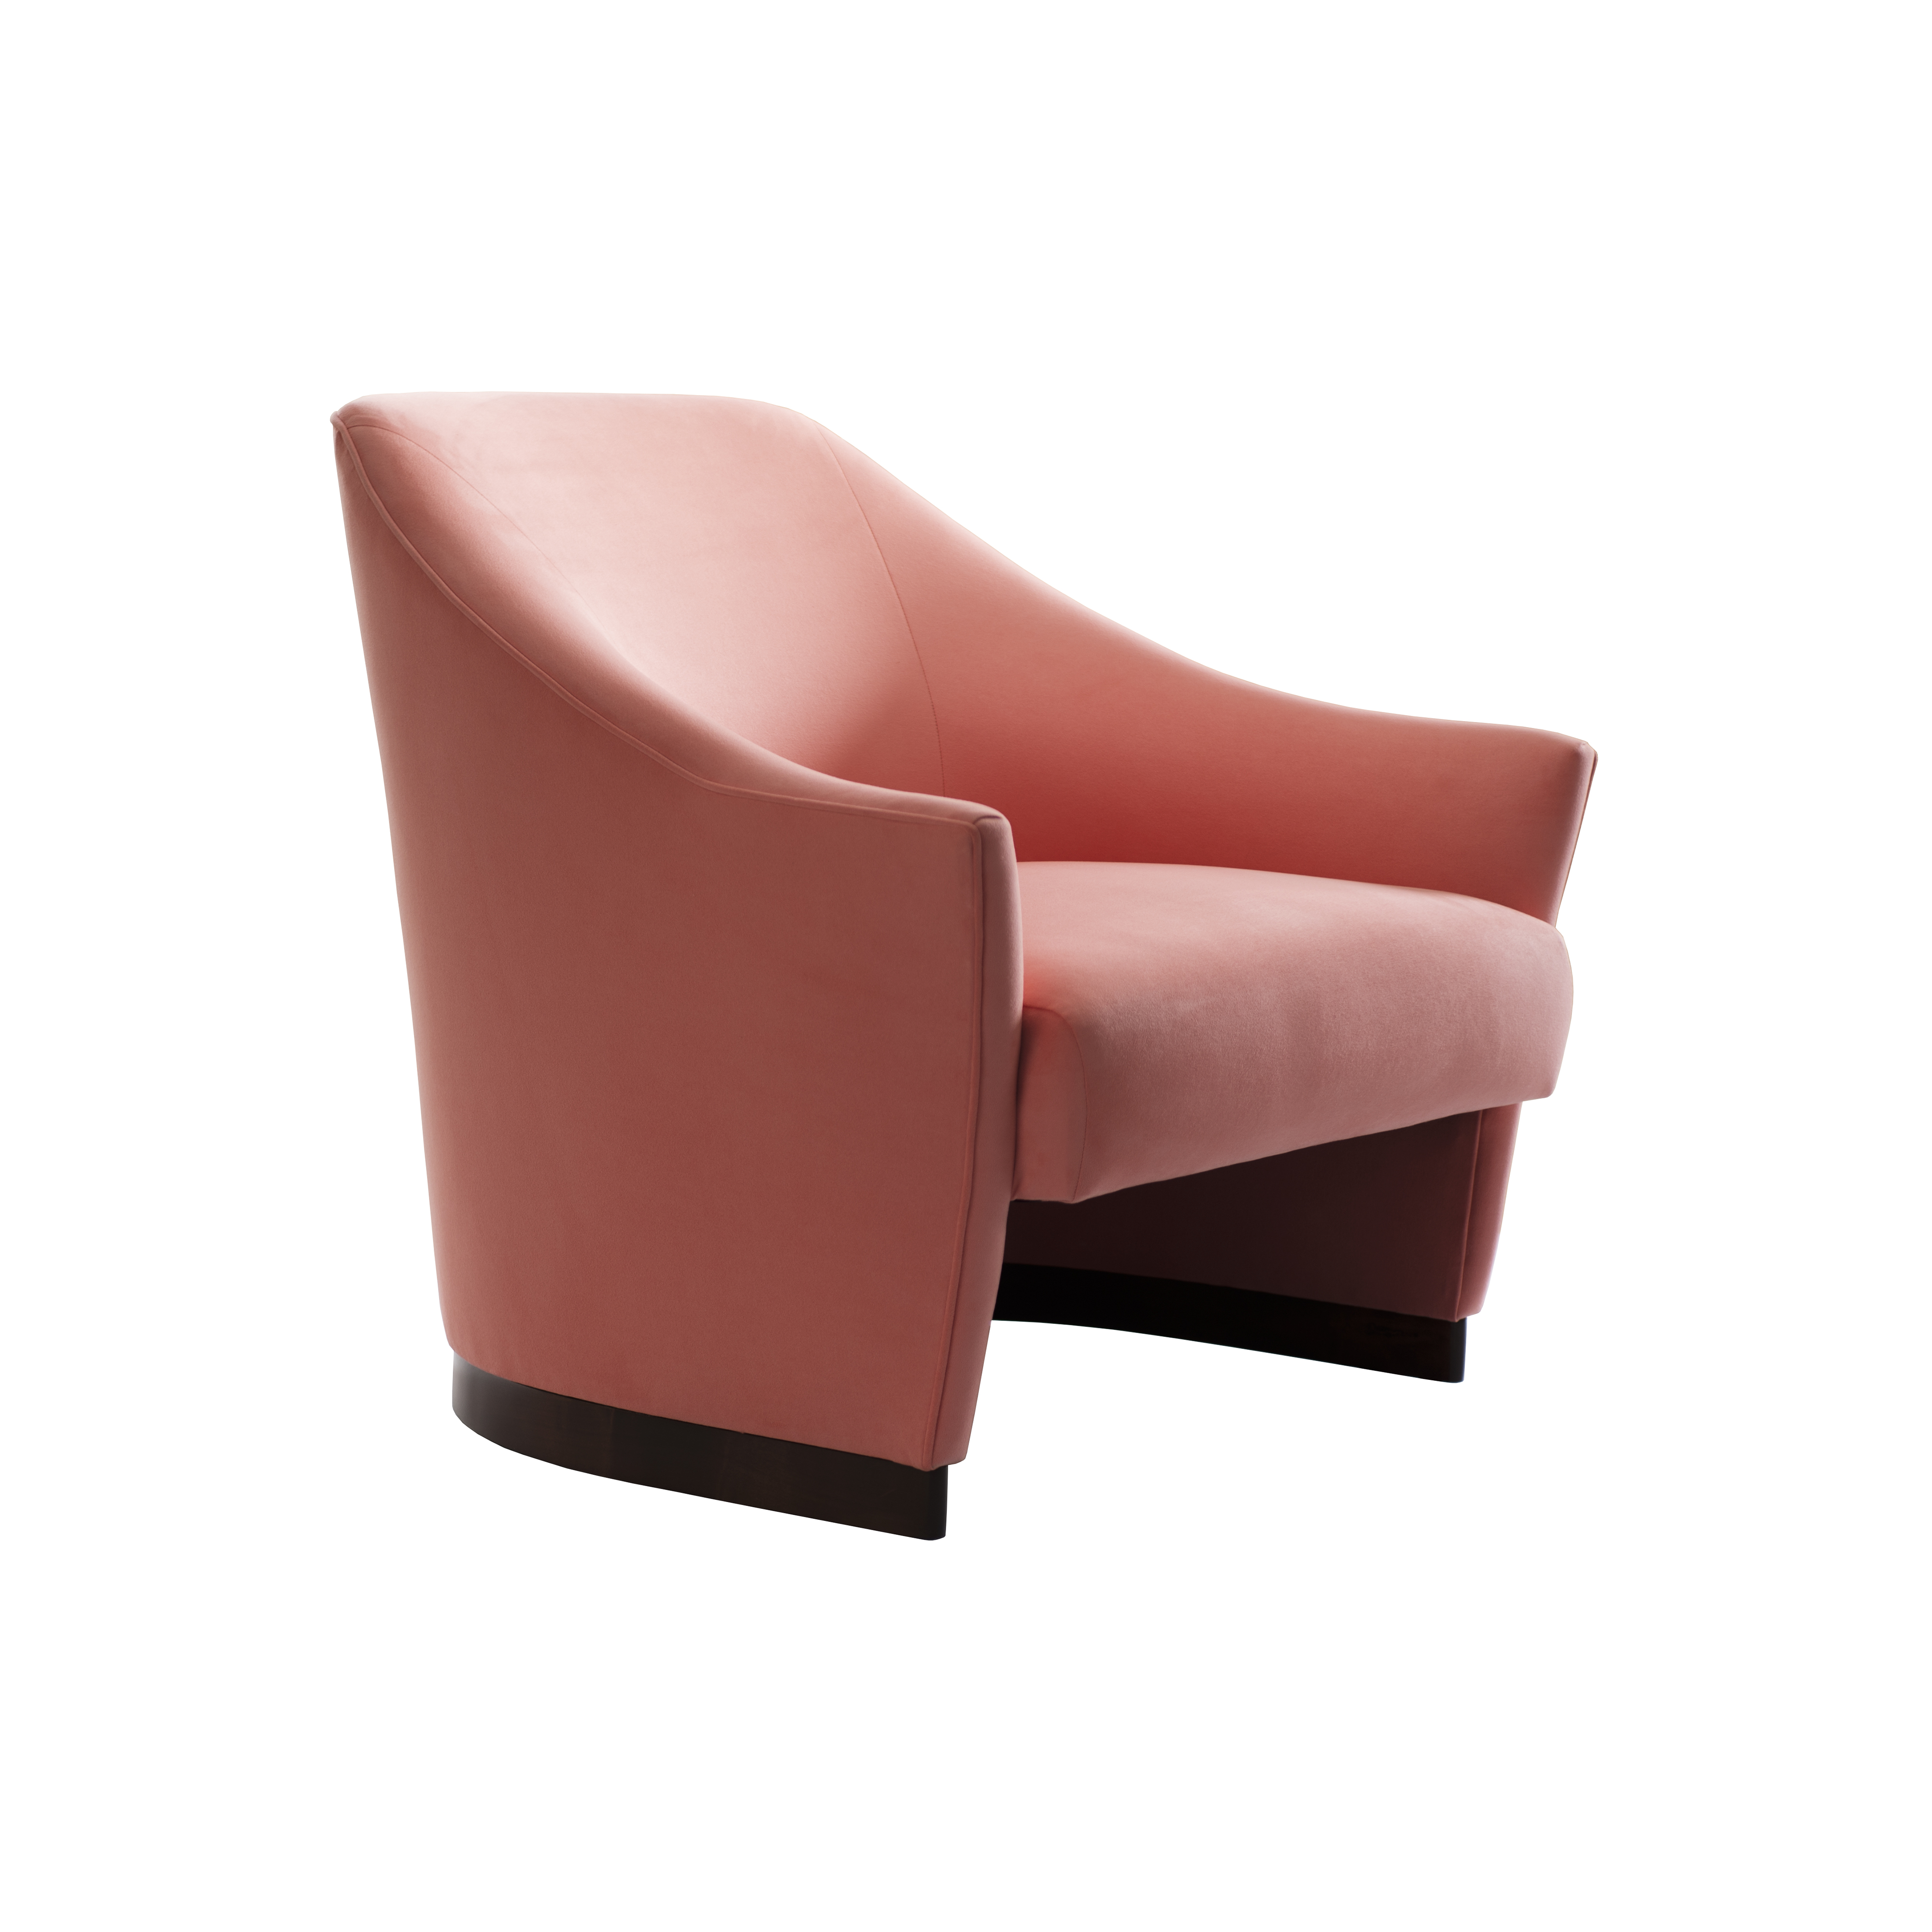 Nathan Anthony Cruise Chair